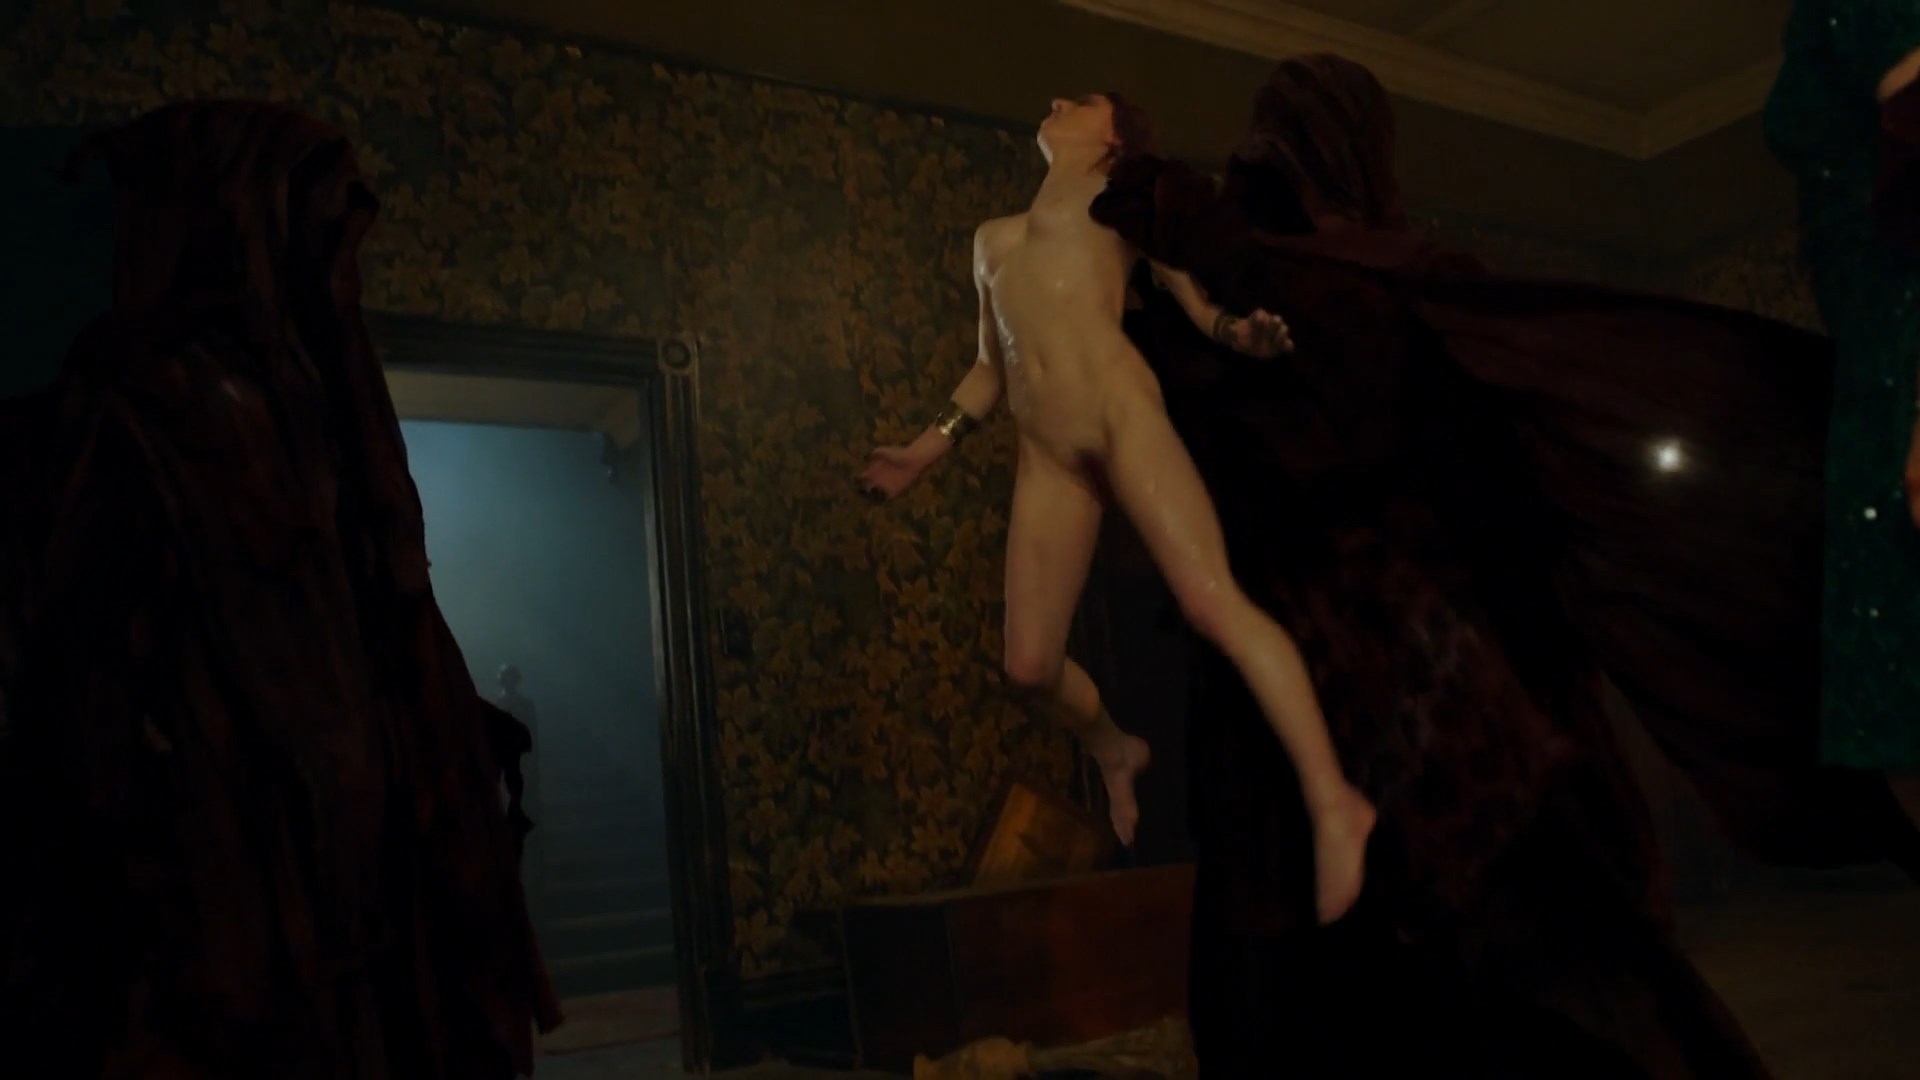 Evil ash nude lucy dead lawless vs Countess Palatine